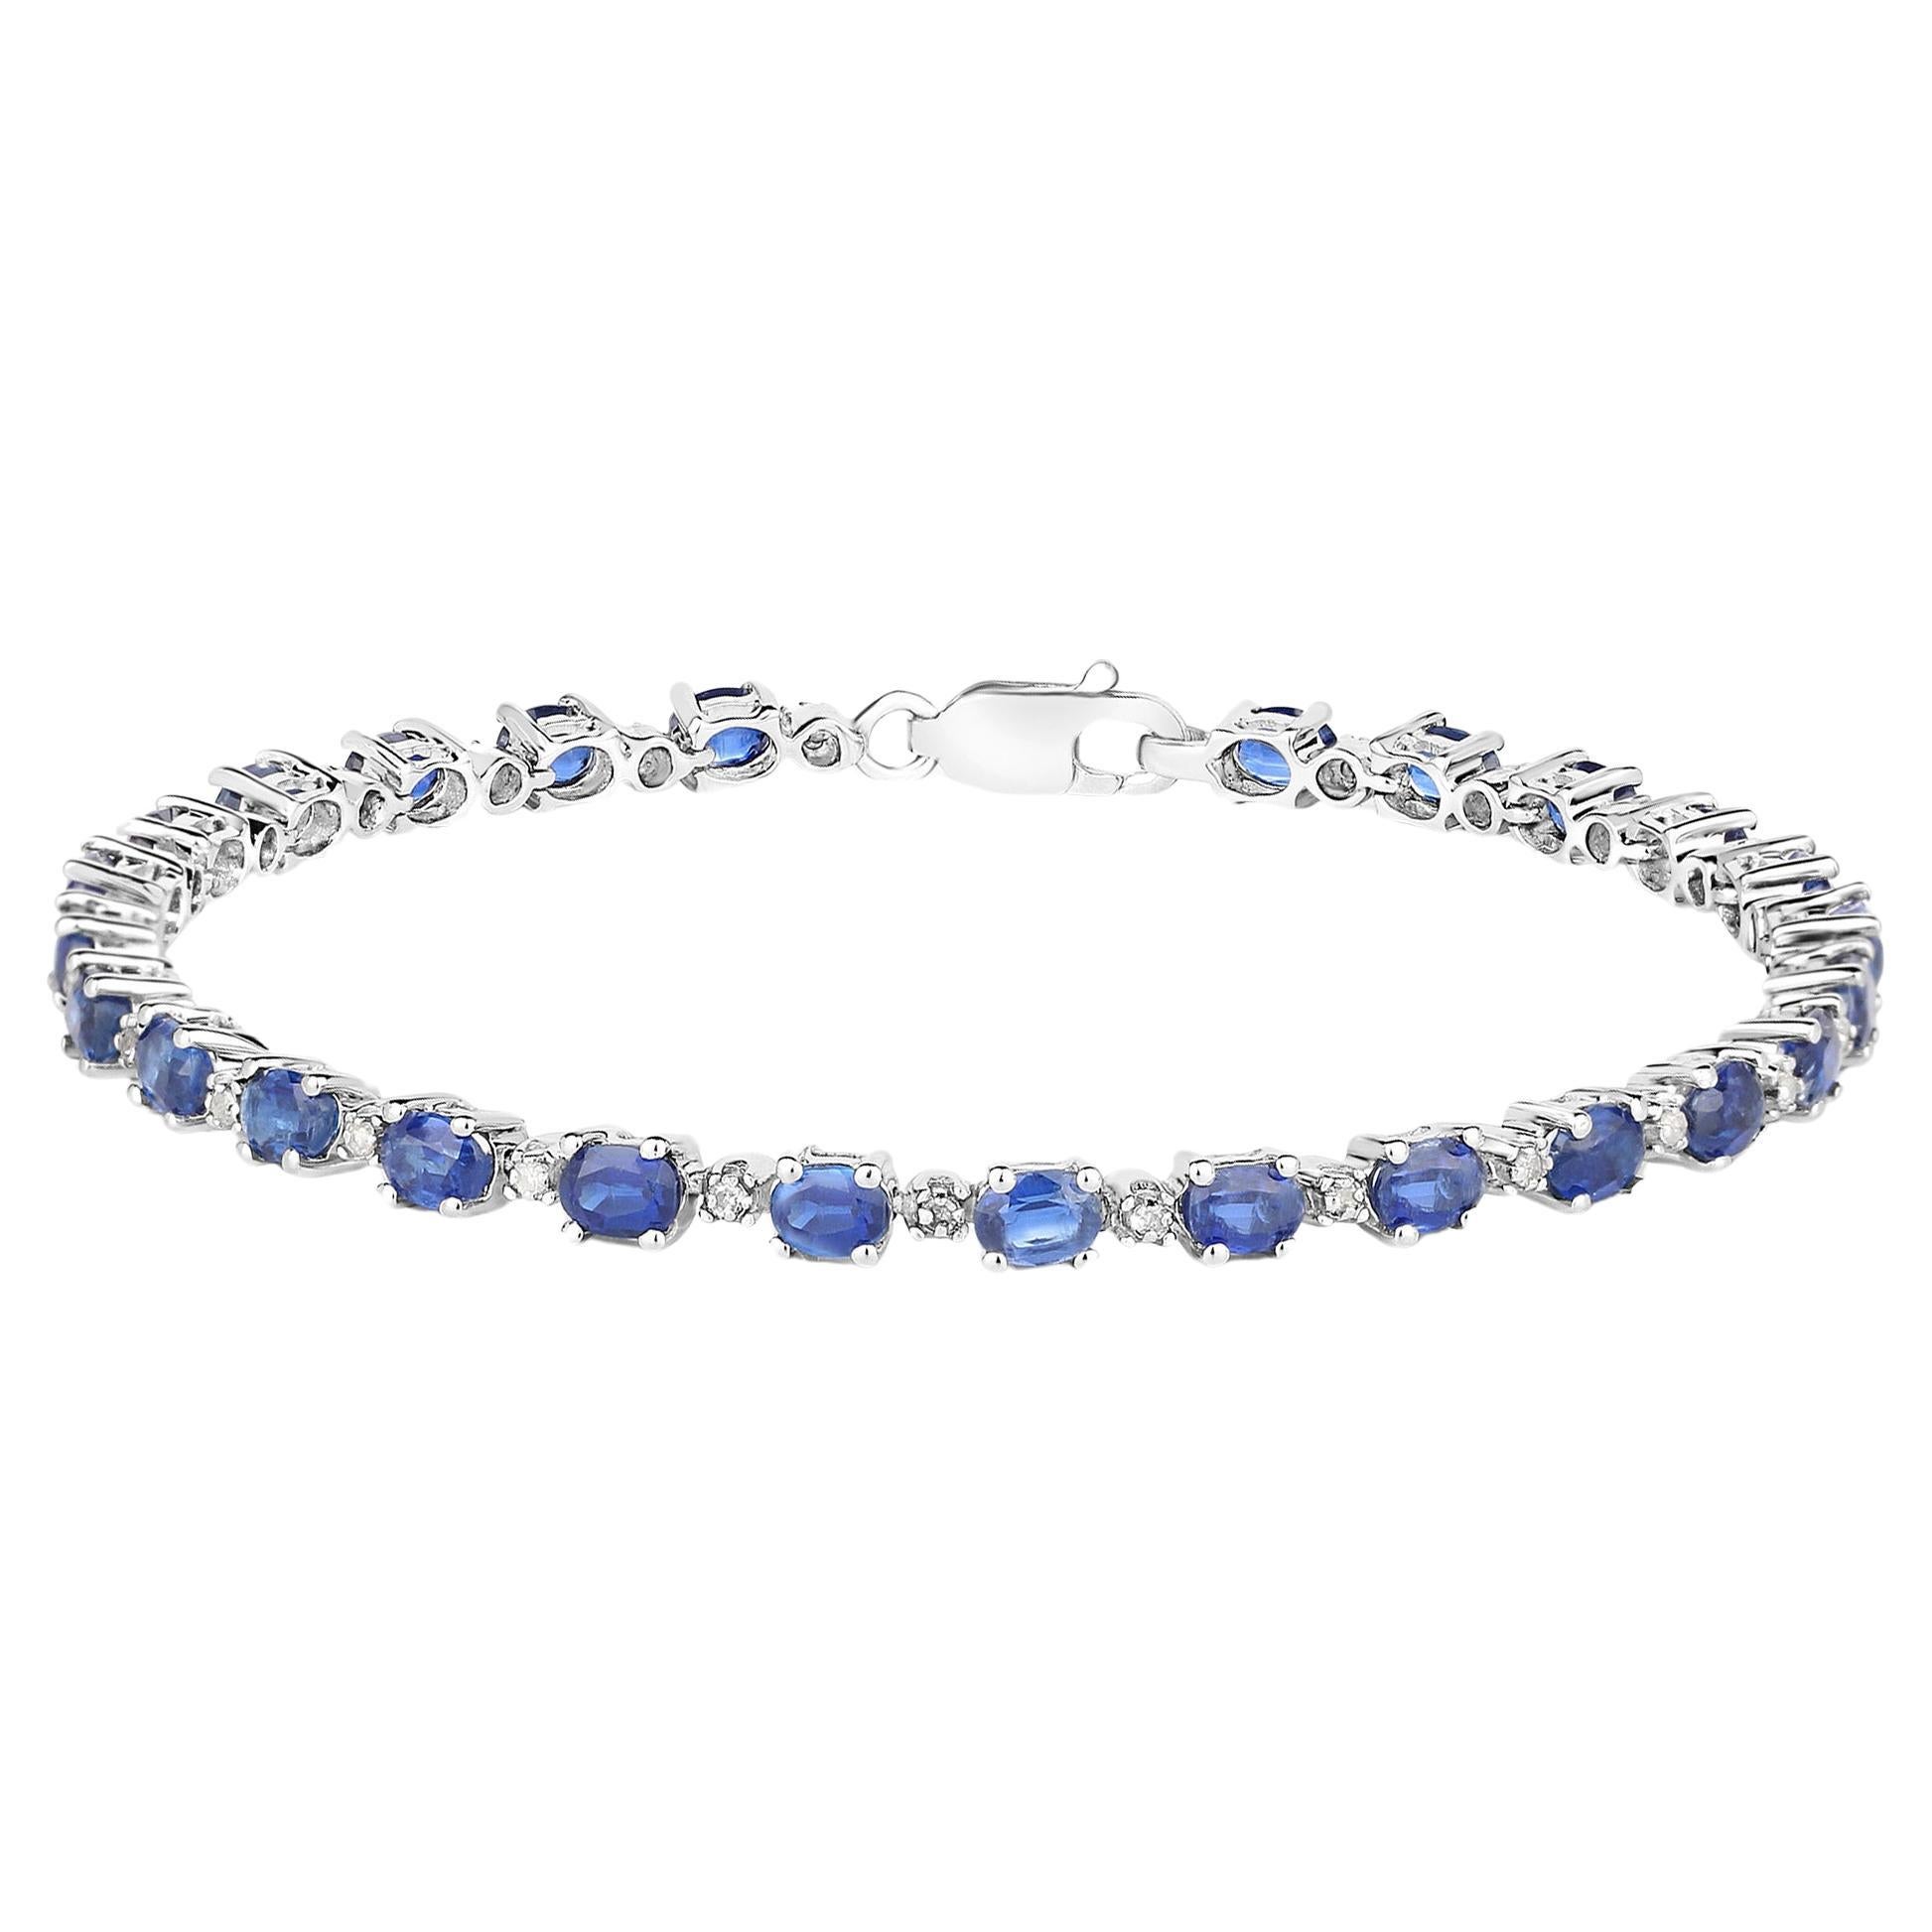 Kyanite Tennis Bracelet With Diamonds 6.73 Carats Rhodium Plated Sterling Silver